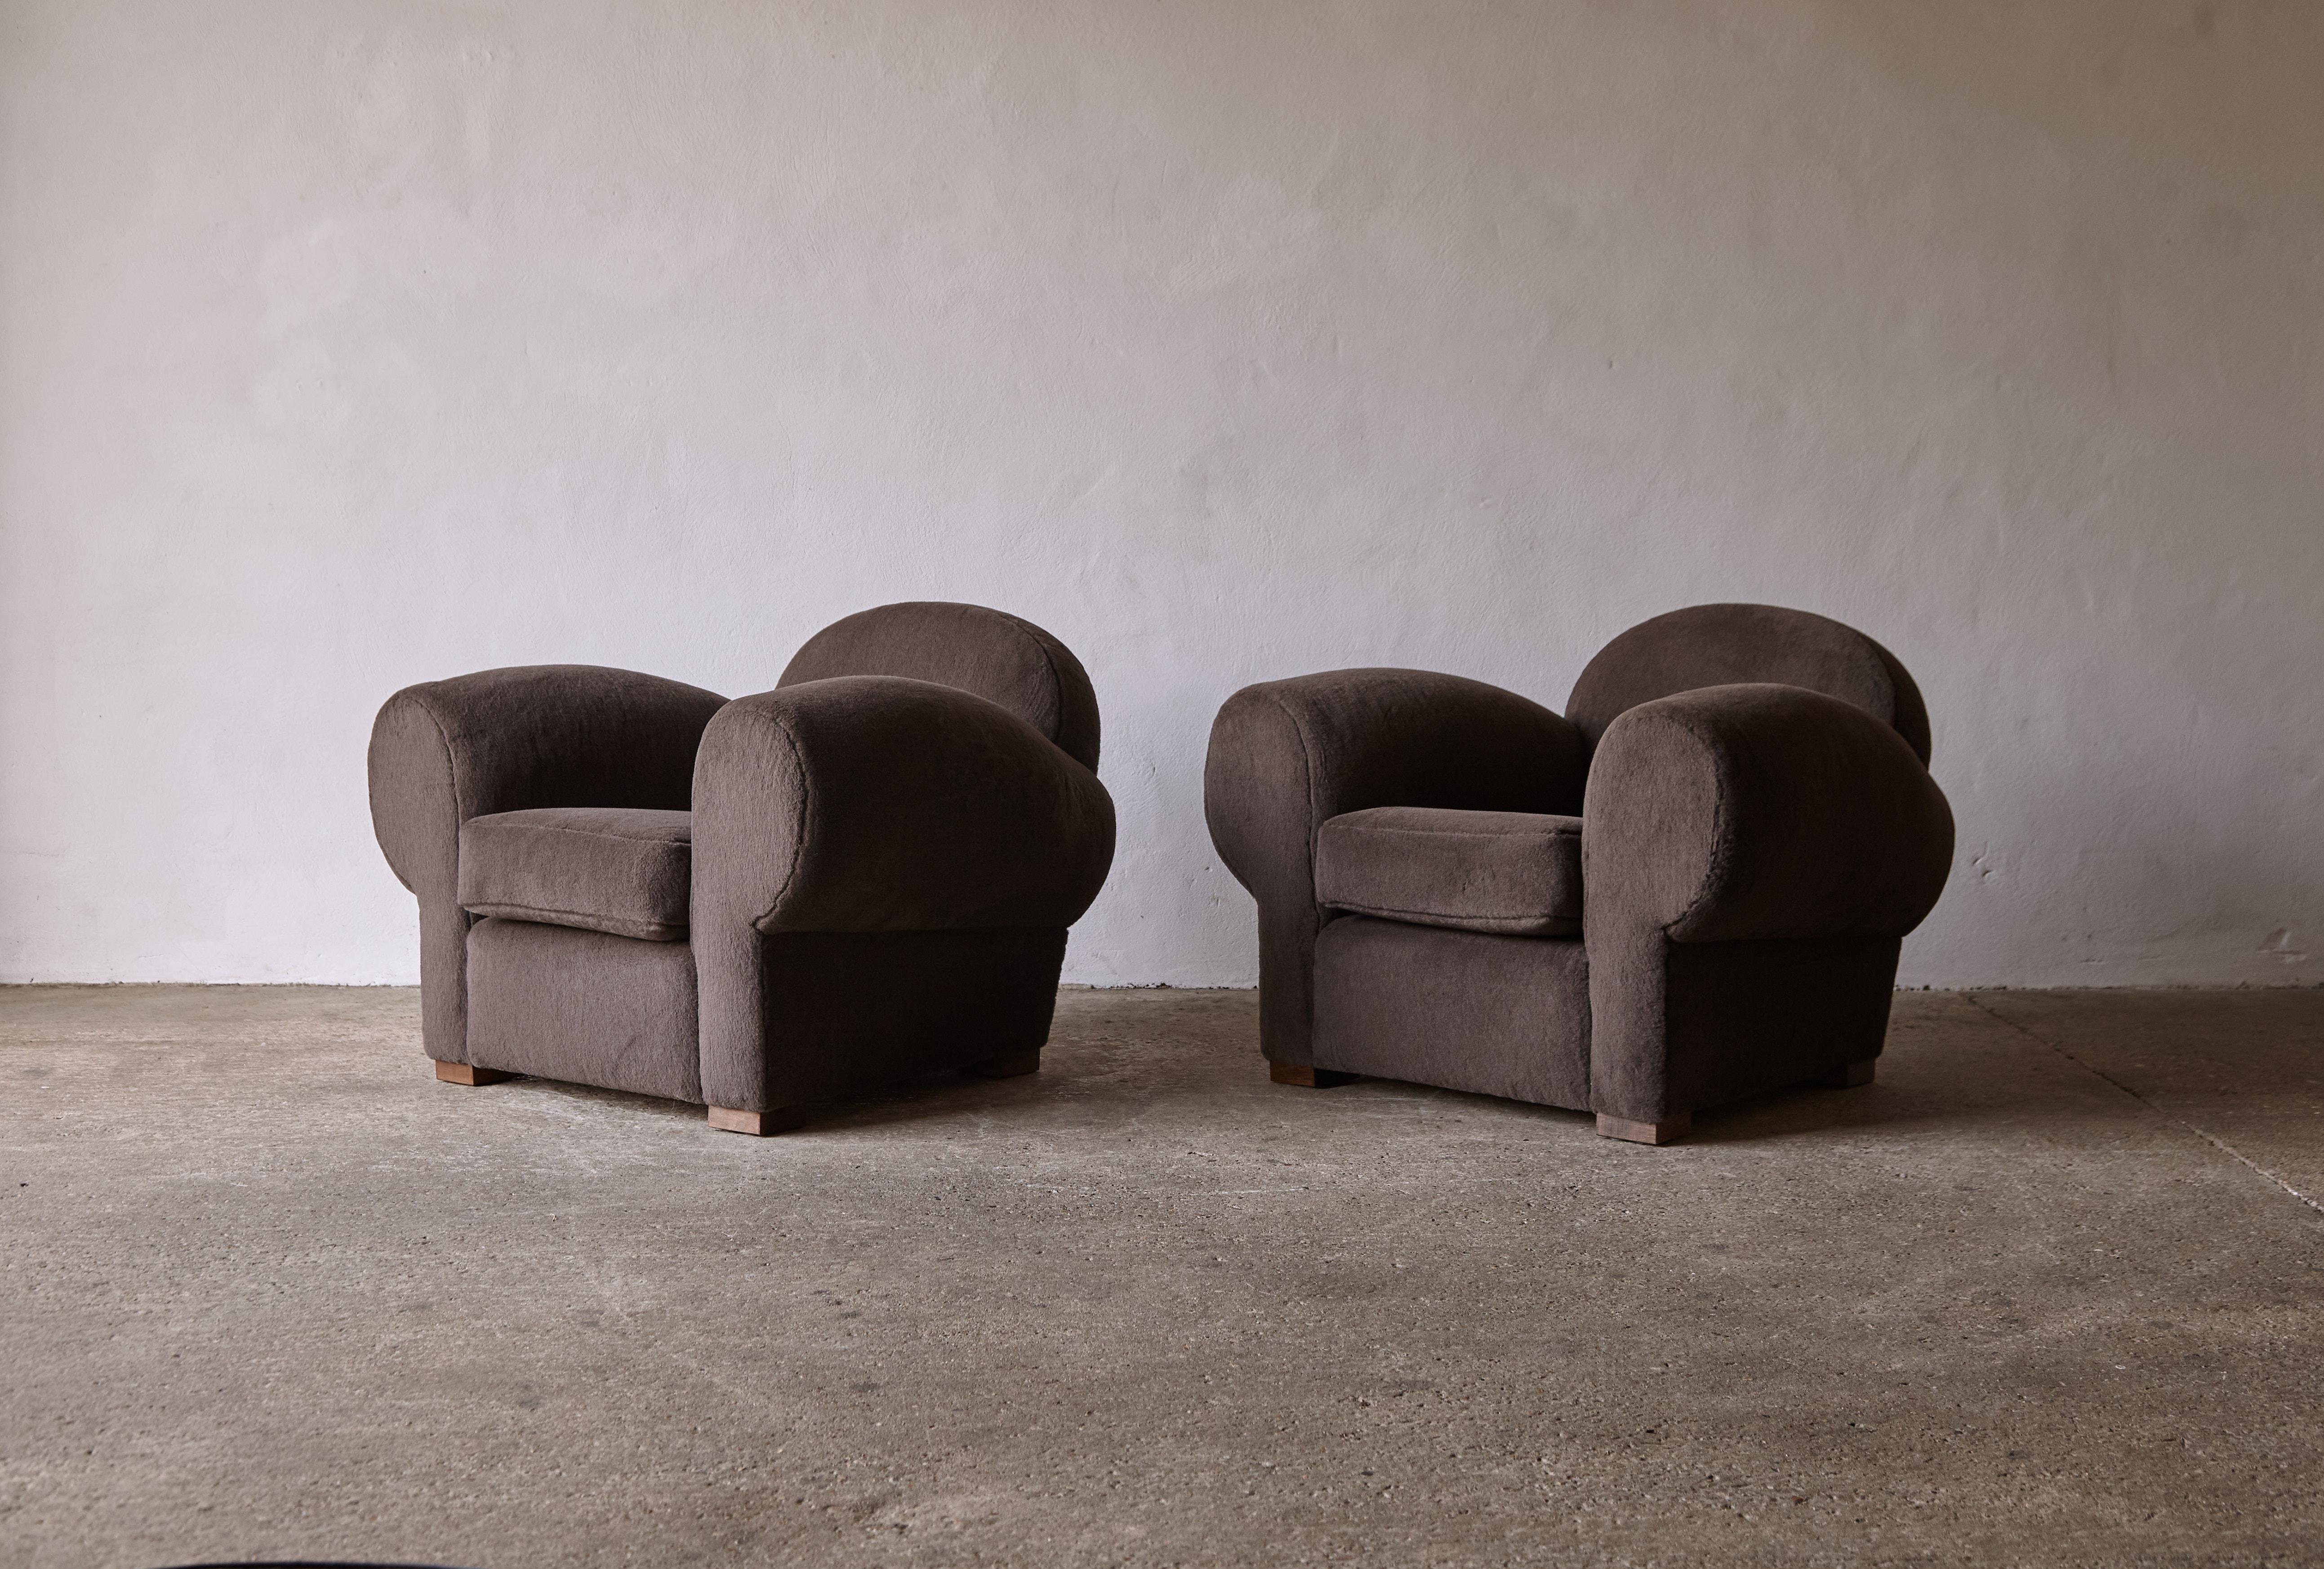 Superb pair of deep seated modern club chairs, upholstered in pure Alpaca. High quality hand-made beech frames and newly upholstered in a brown/grey premium 100% alpaca fabric. Fast shipping worldwide.

Measures: H 78cm
W 98cm
D 94cm
Seat Height